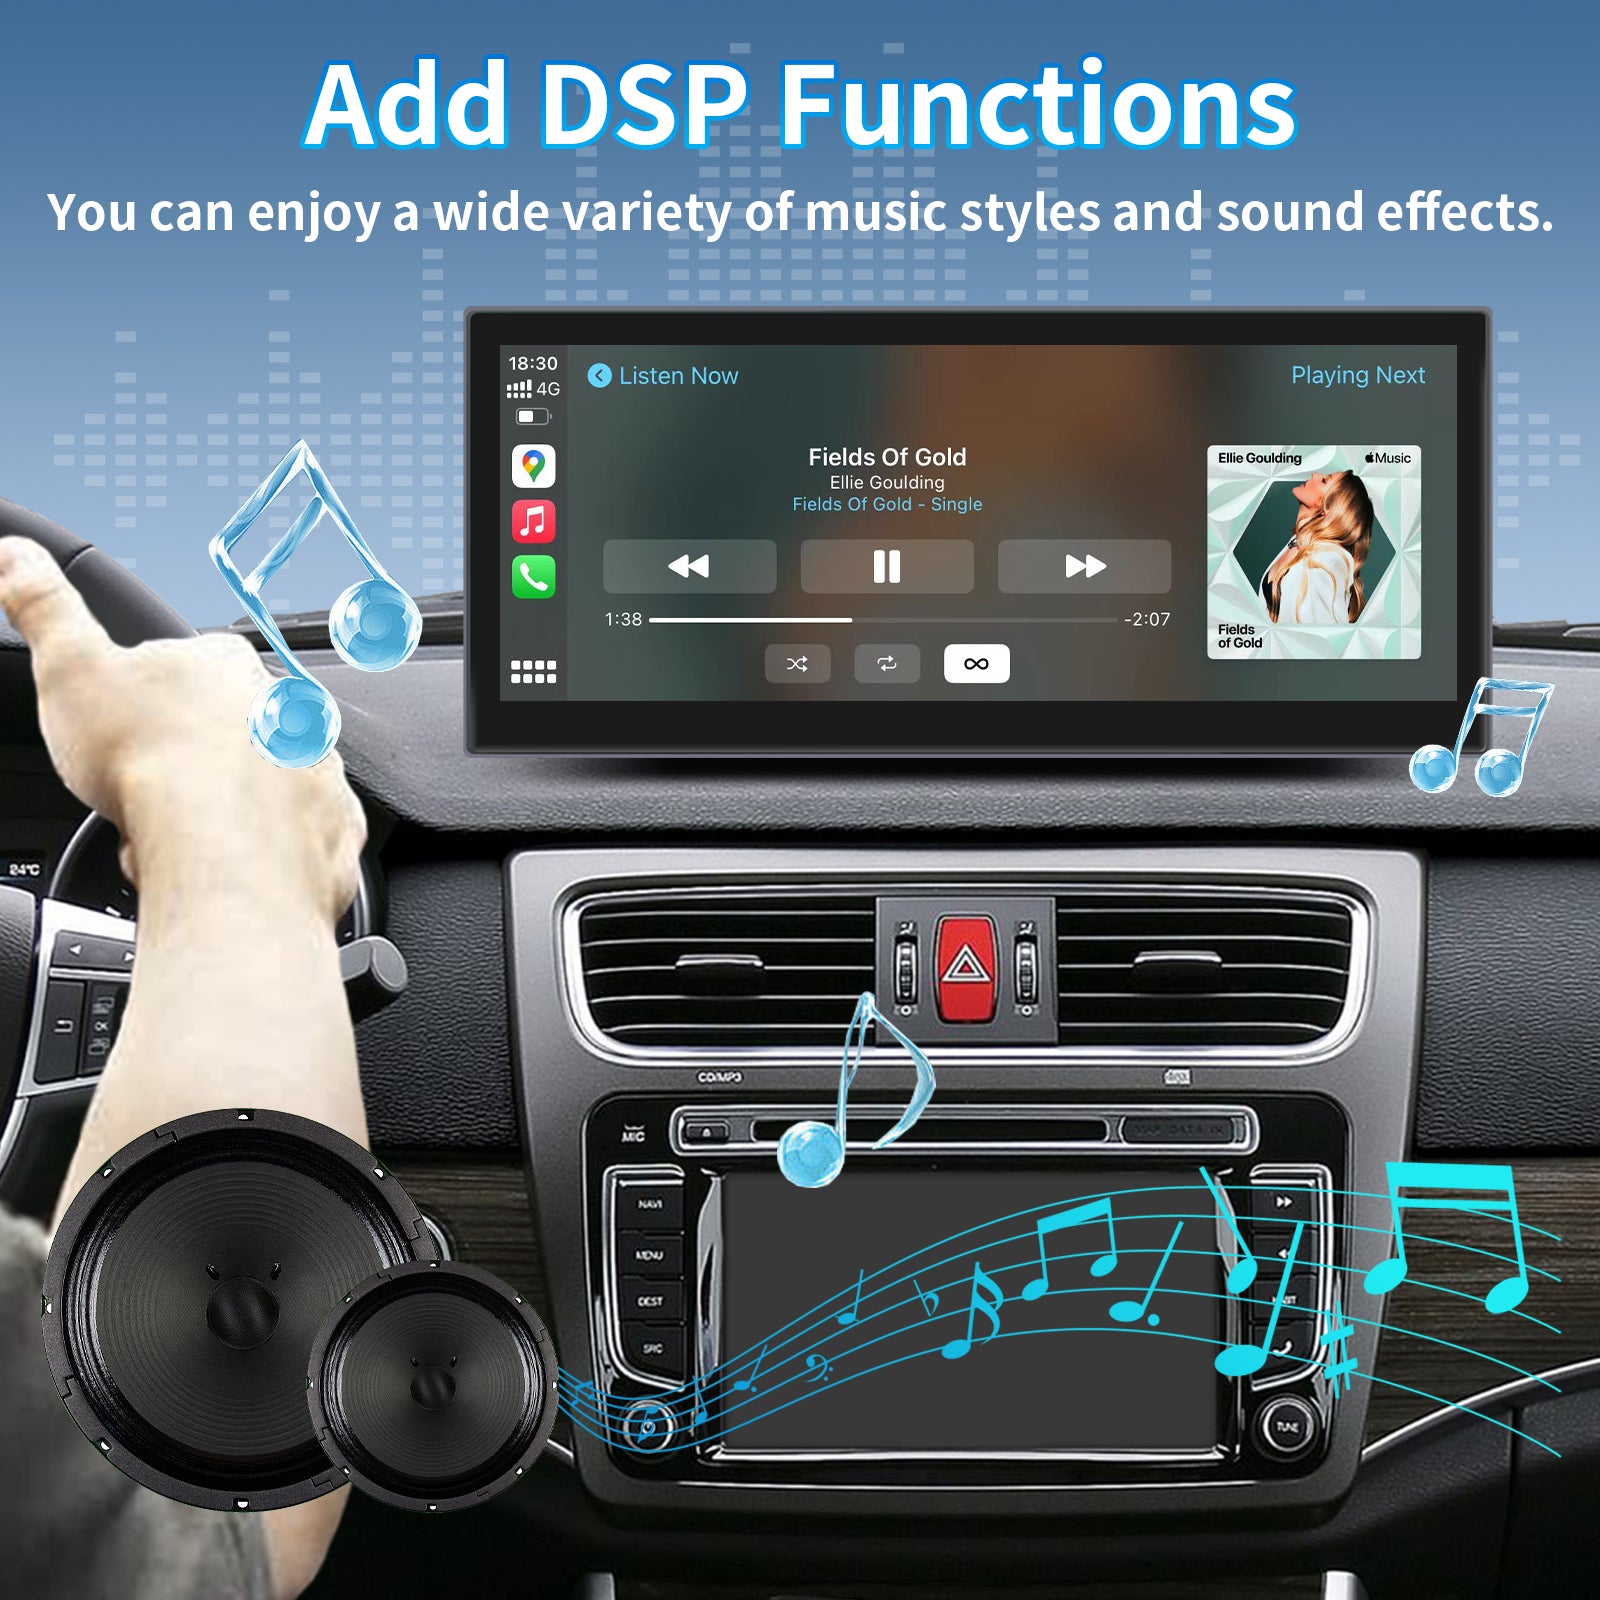  Wireless Apple Carplay & Android Auto for Car Stereo, Portable  7 Inch Apple Car Play Touch Screen Sync GPS Navigation Audio Car Radio  Receiver for Car, Bluetooth, Siri, Multimedia Player, FM 